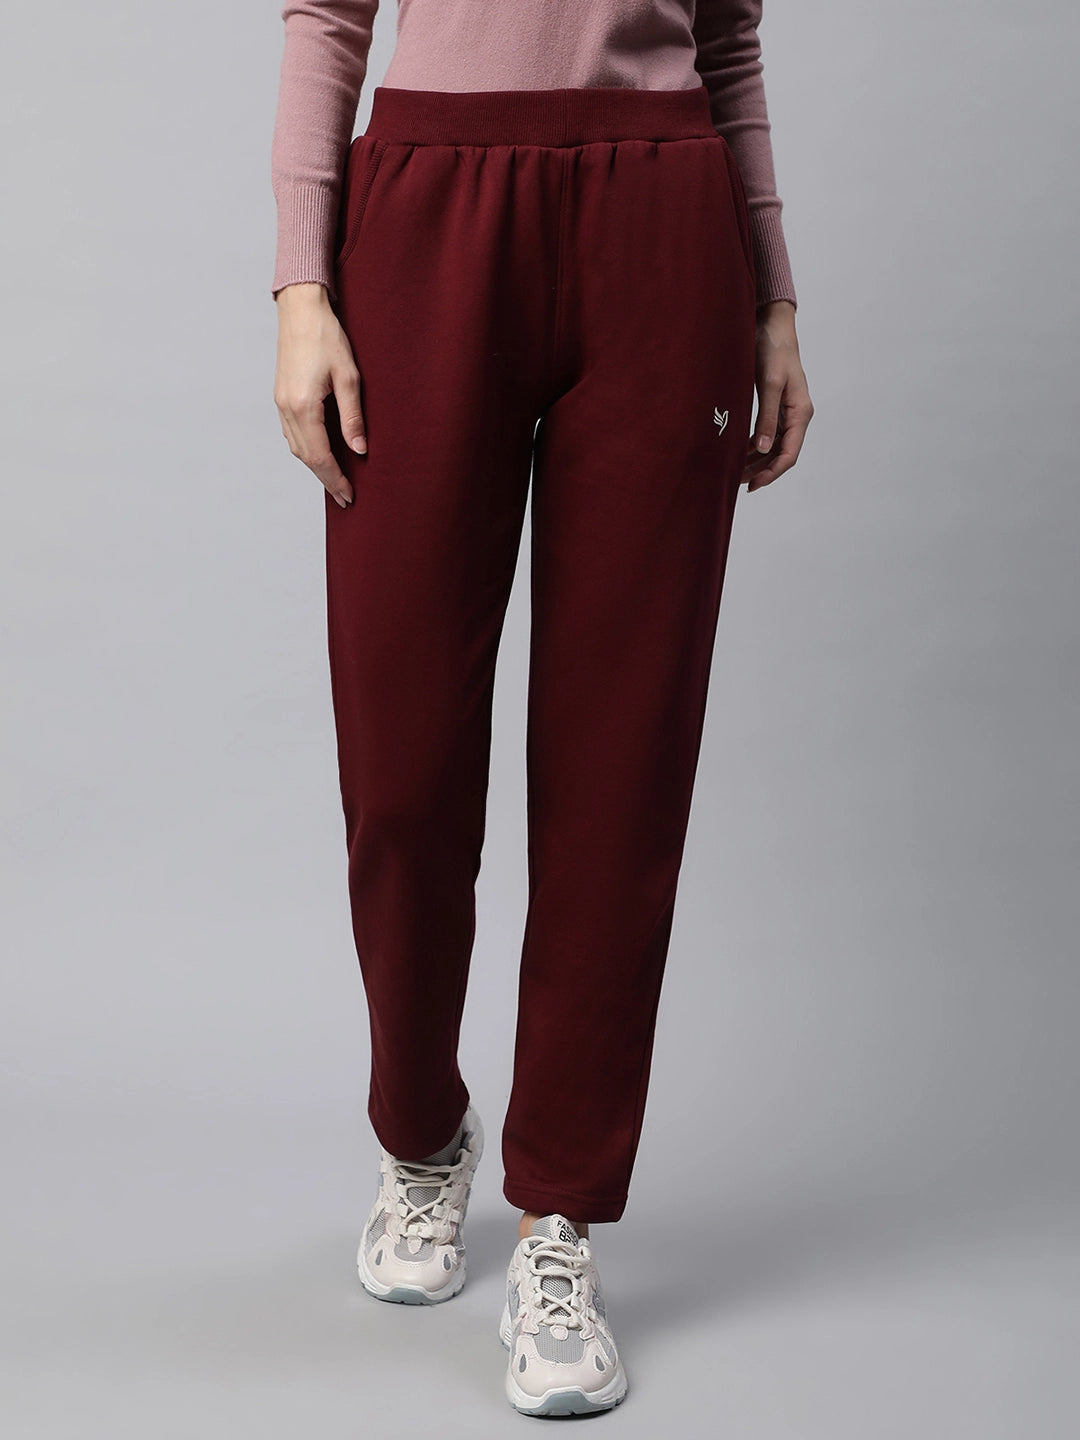 Neat Stitched Maroon Cotton Straight Trouser Capri Pants For Girls  Ladies-Assorted Colors Available